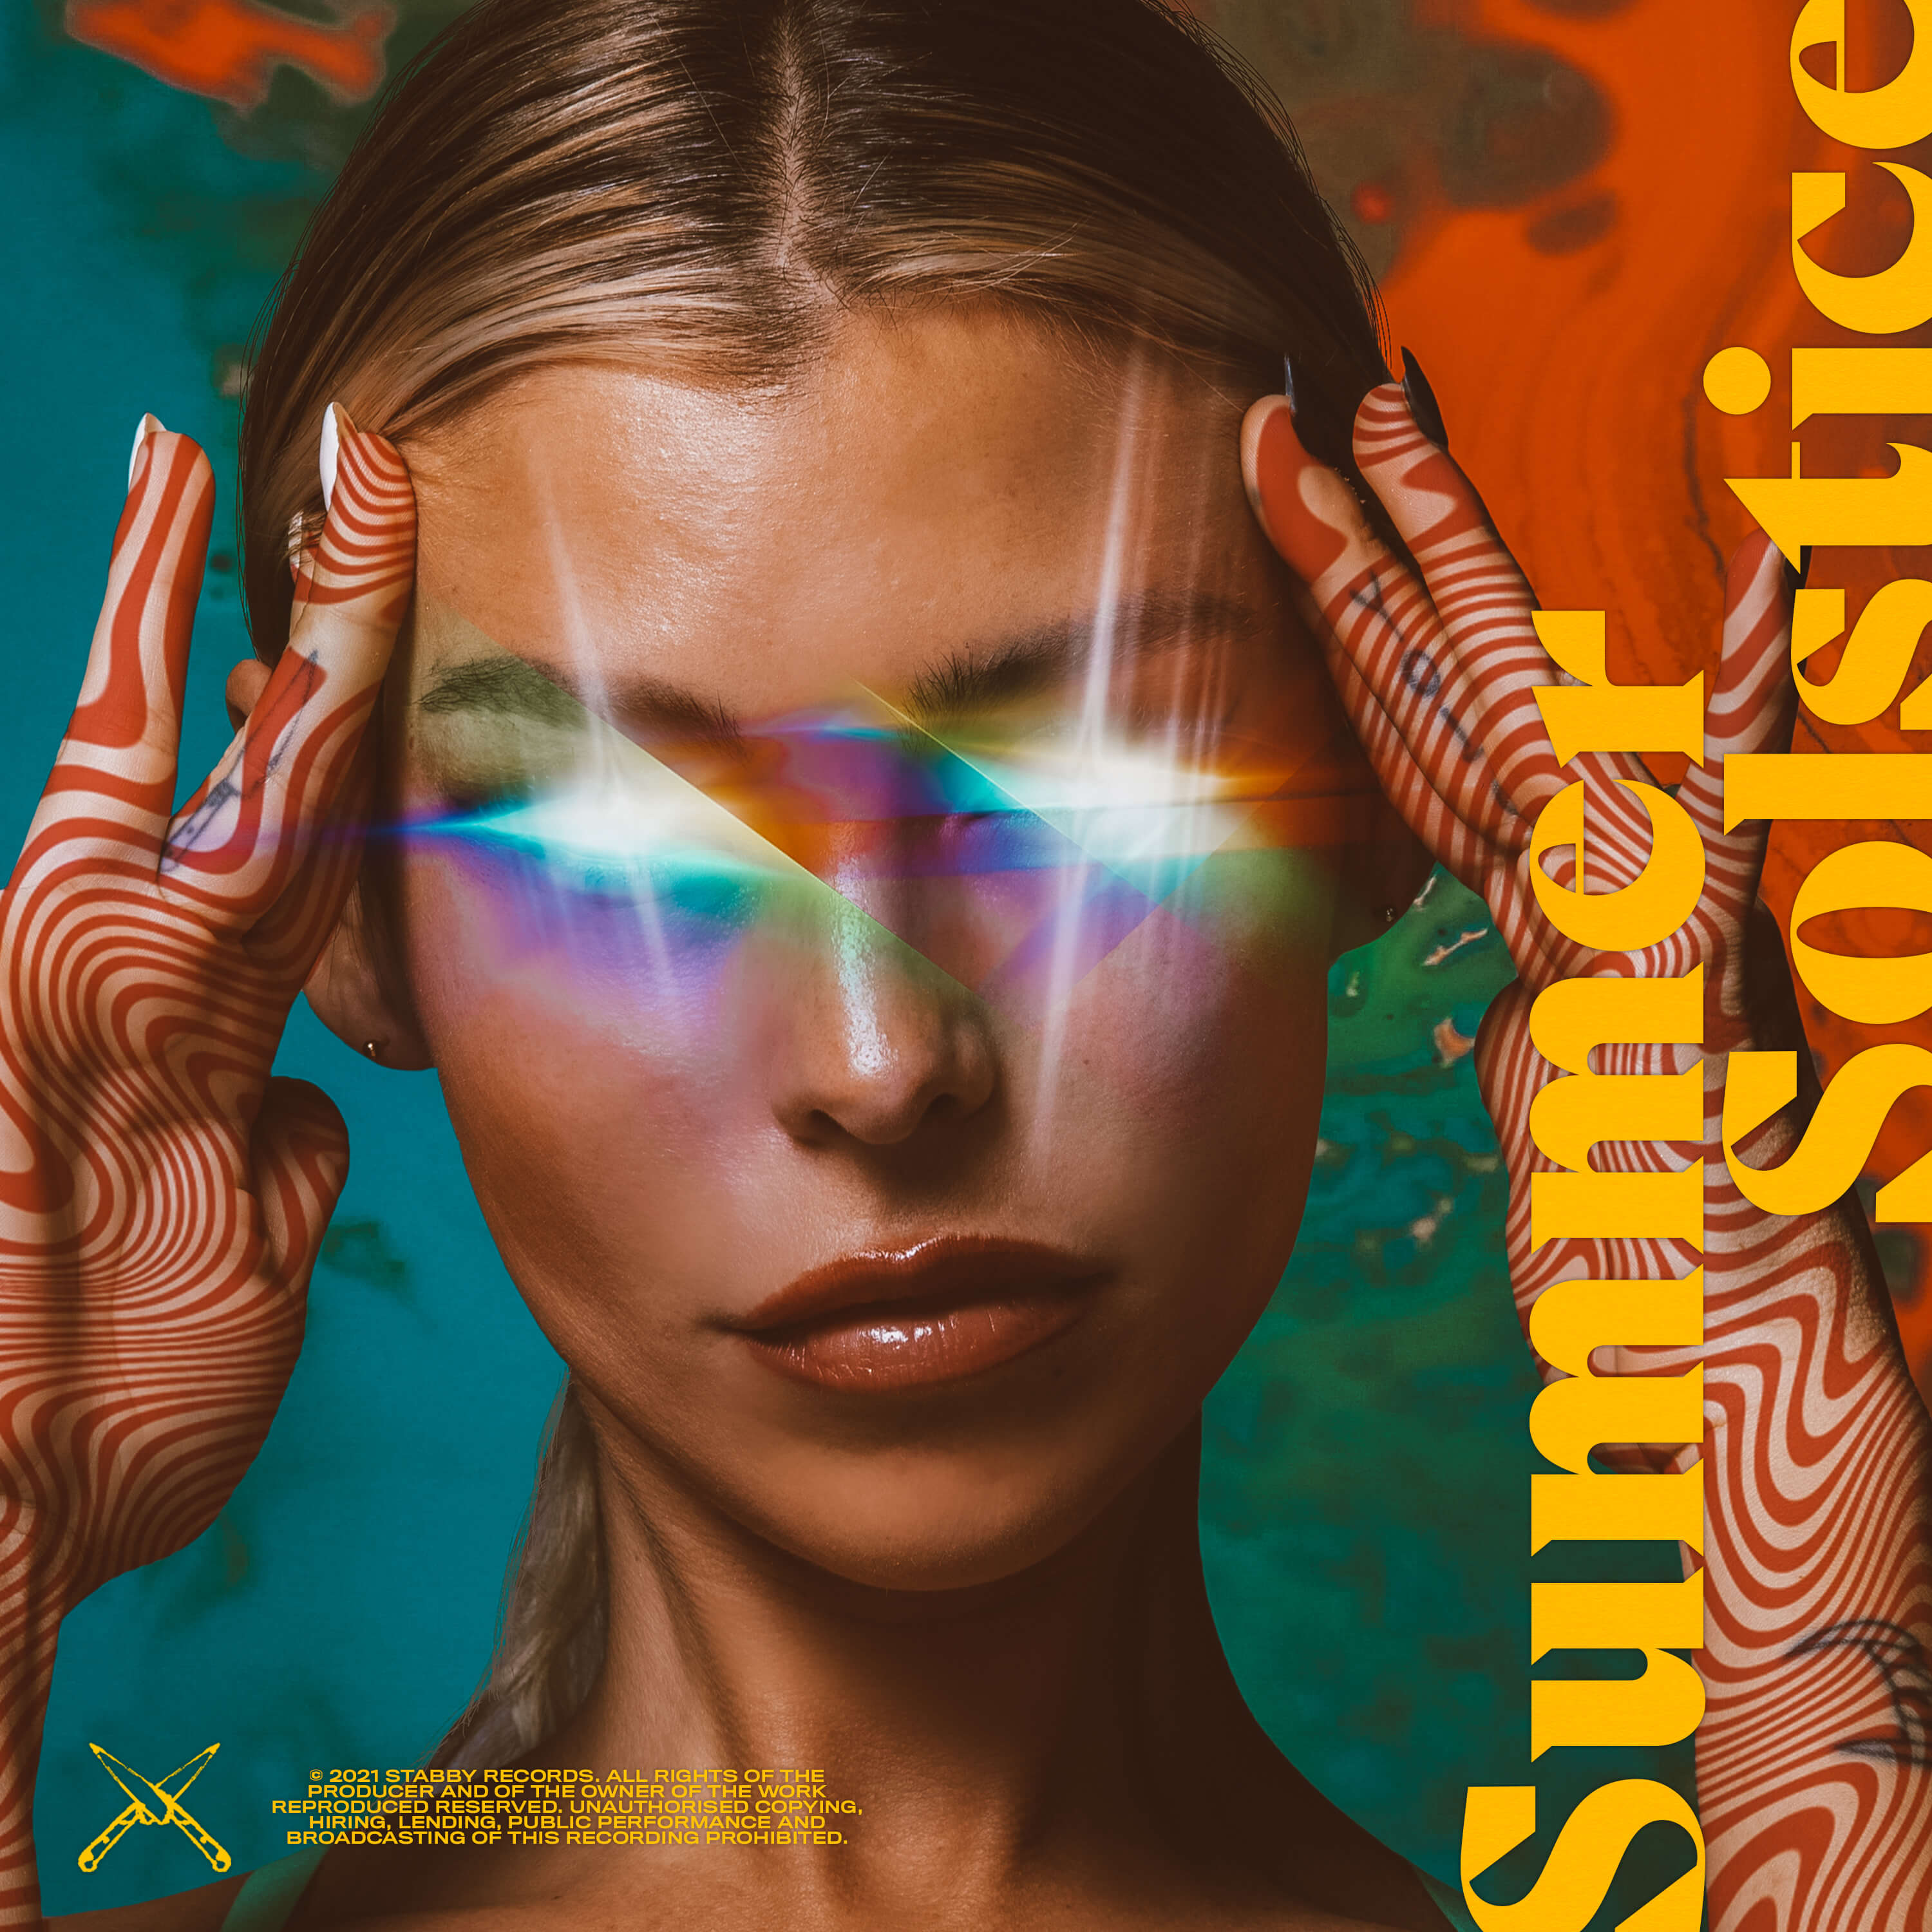 Find Inner Paradise With Sam Blacky’s New ‘Summer Solstice’ EP